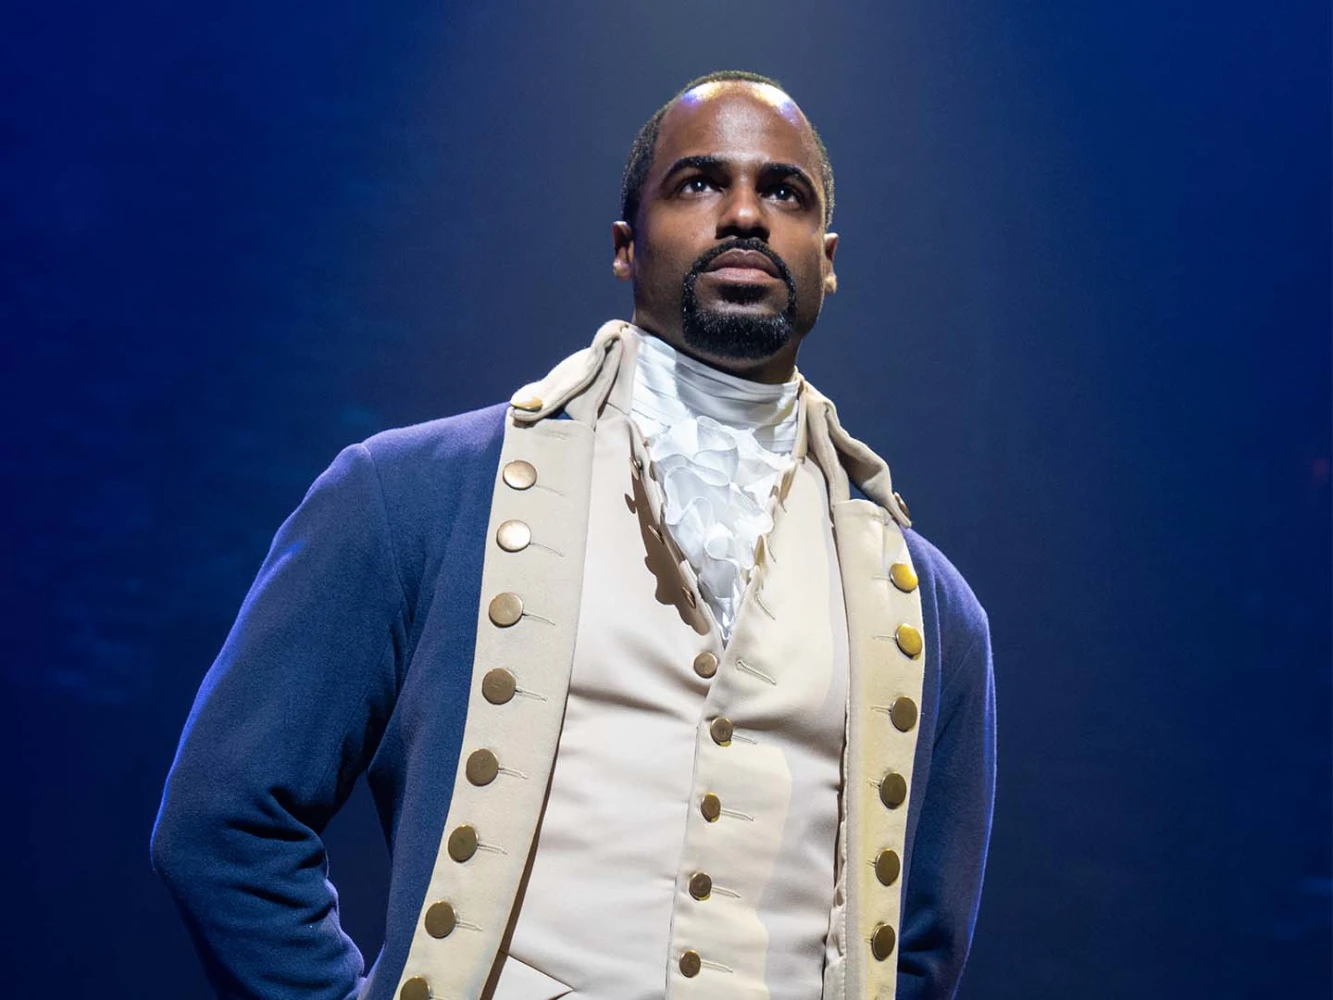 Hamilton on Broadway: What to expect - 6